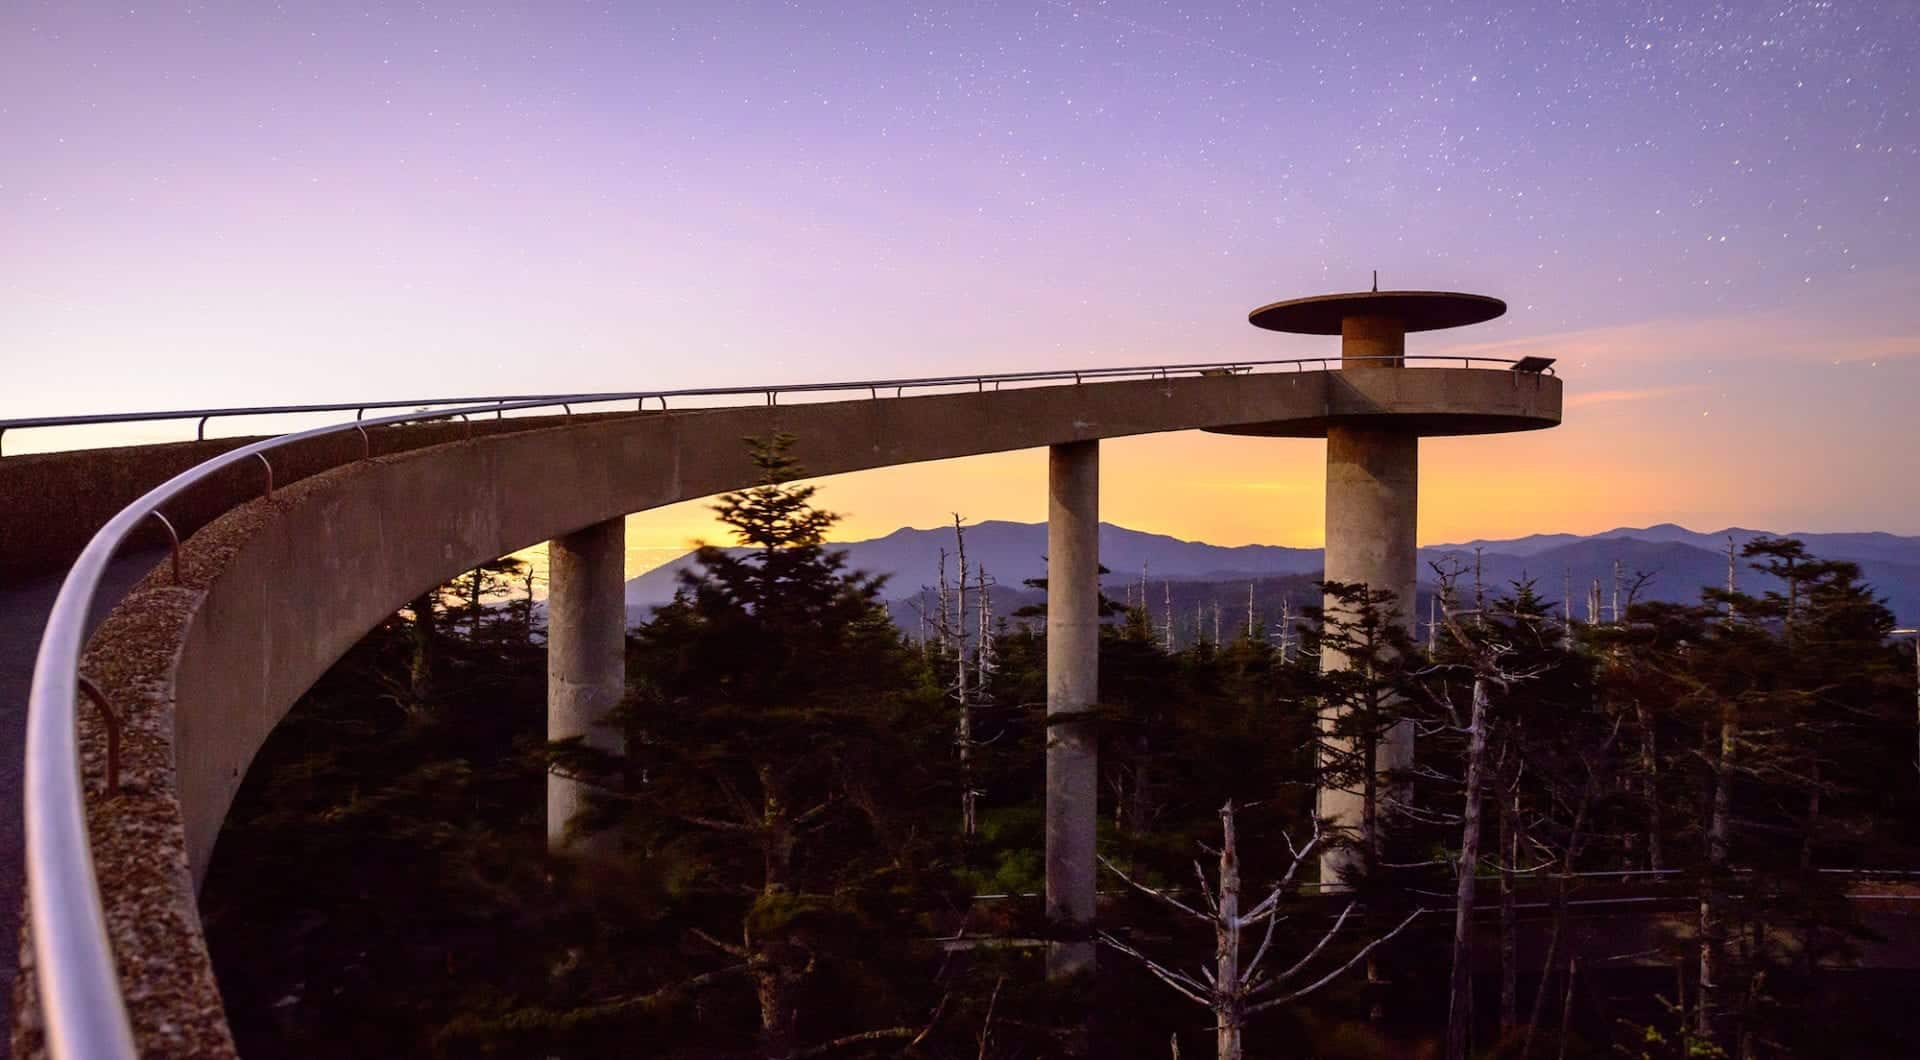 Clingmans Dome Observation Tower at Dusk